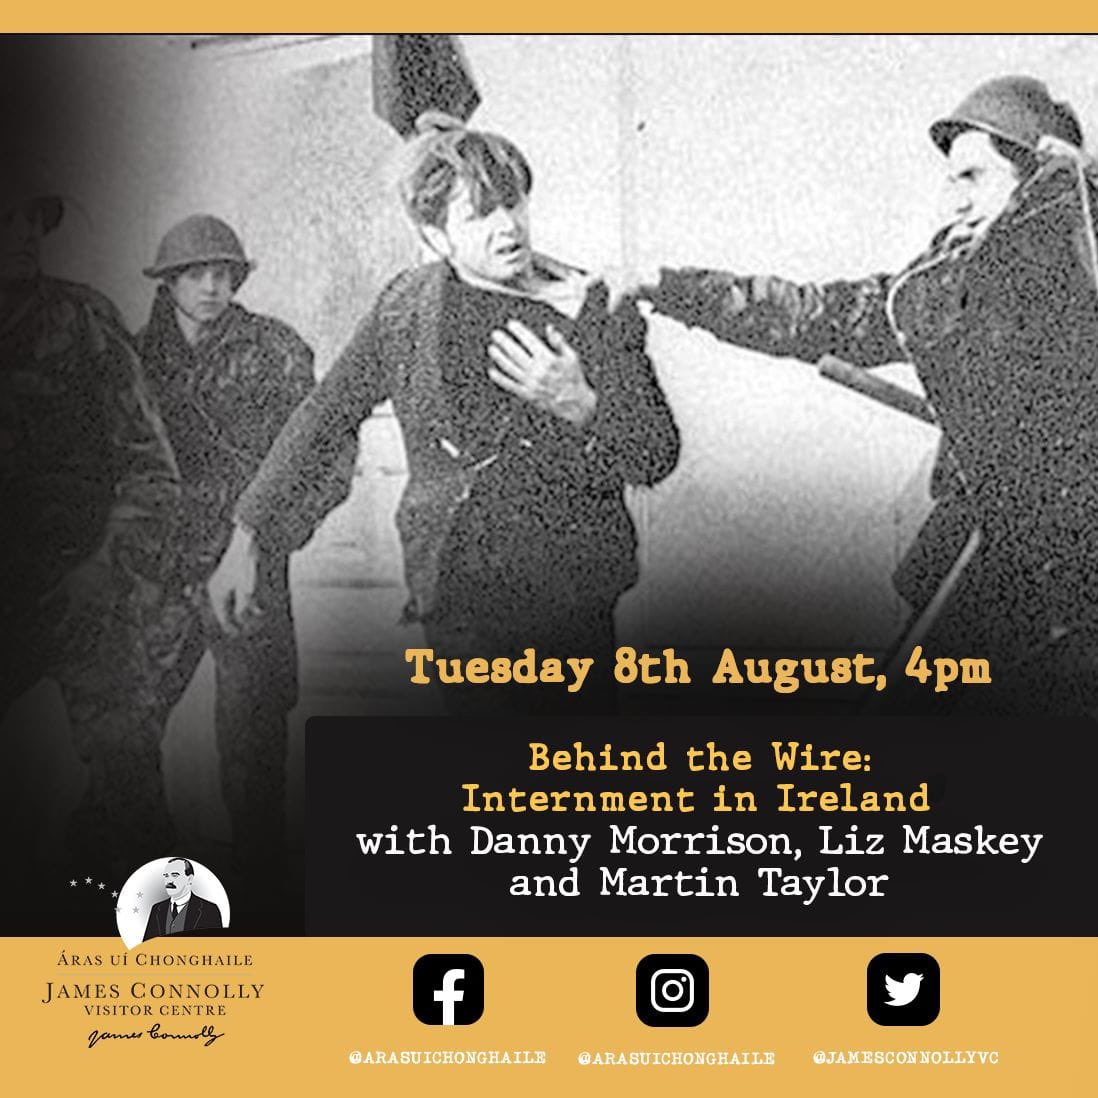 🗣️‘Behind the Wire: Internment in Ireland’ with Danny Morrison, Liz Maskey and Martin Taylor

This talk will explore Britain’s policy of internment in Ireland & hear first-hand accounts from internees of the most recent phase of conflict in the north

🗓️Tuesday 8th August
⏰1pm